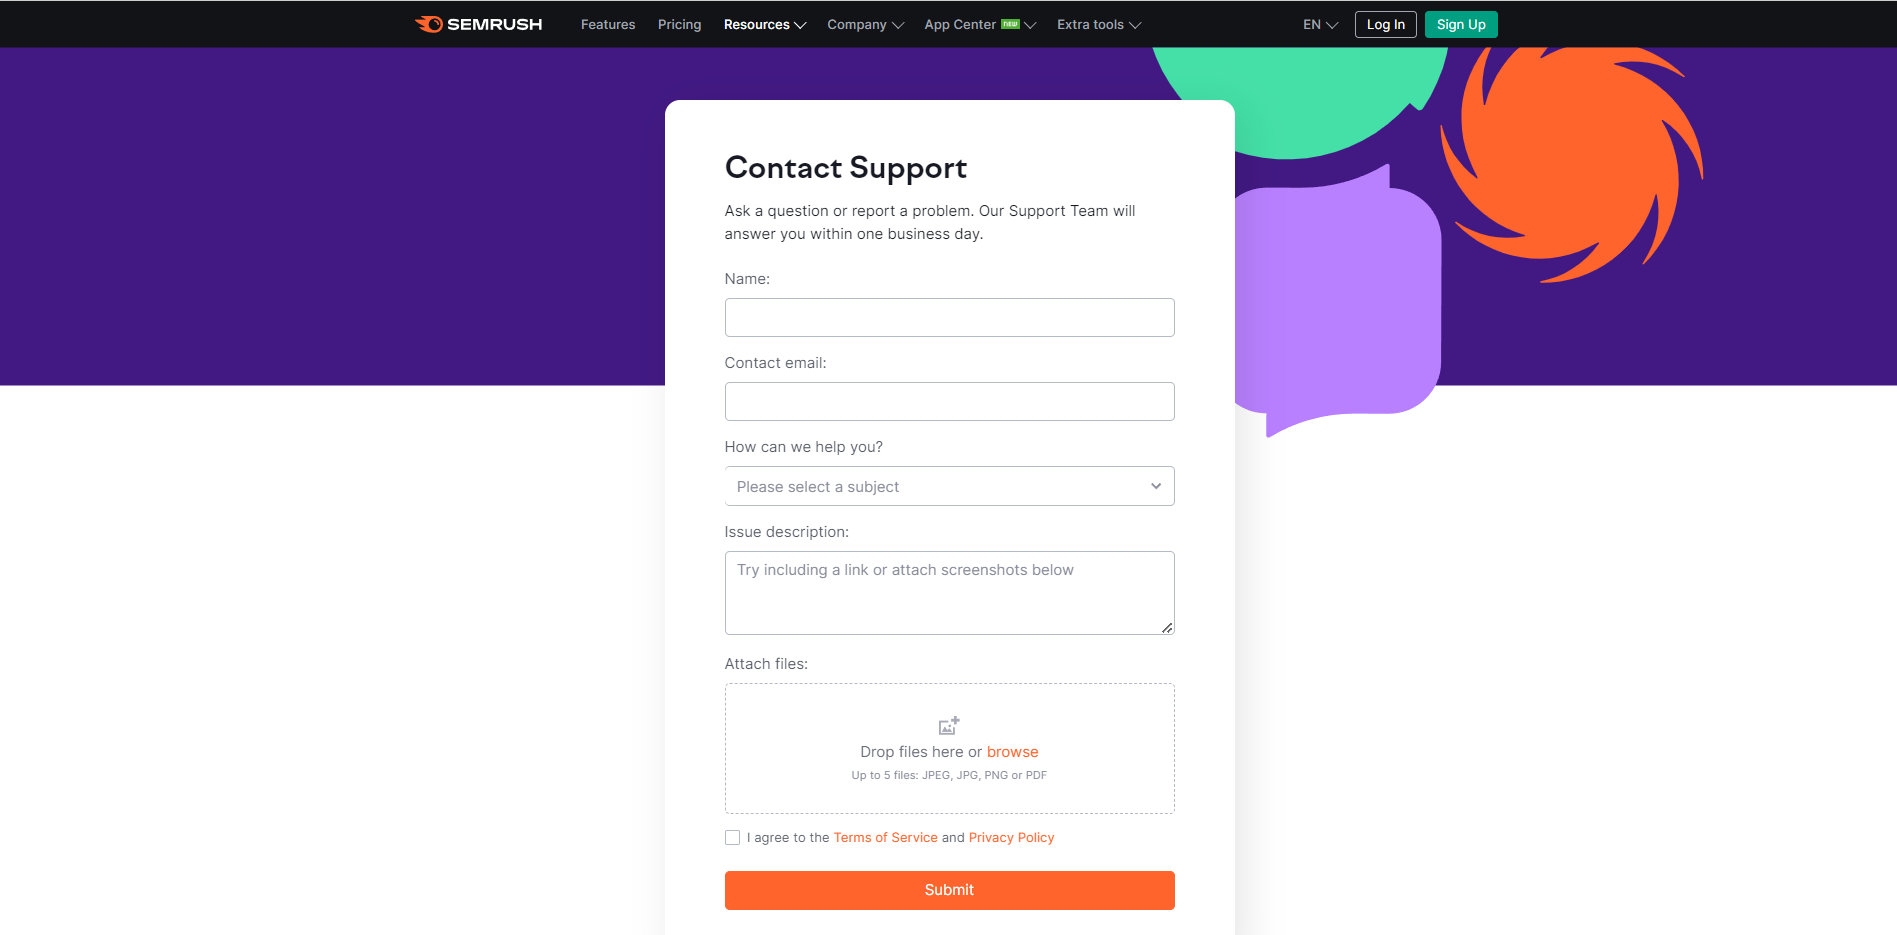 Semrush support page with contact form